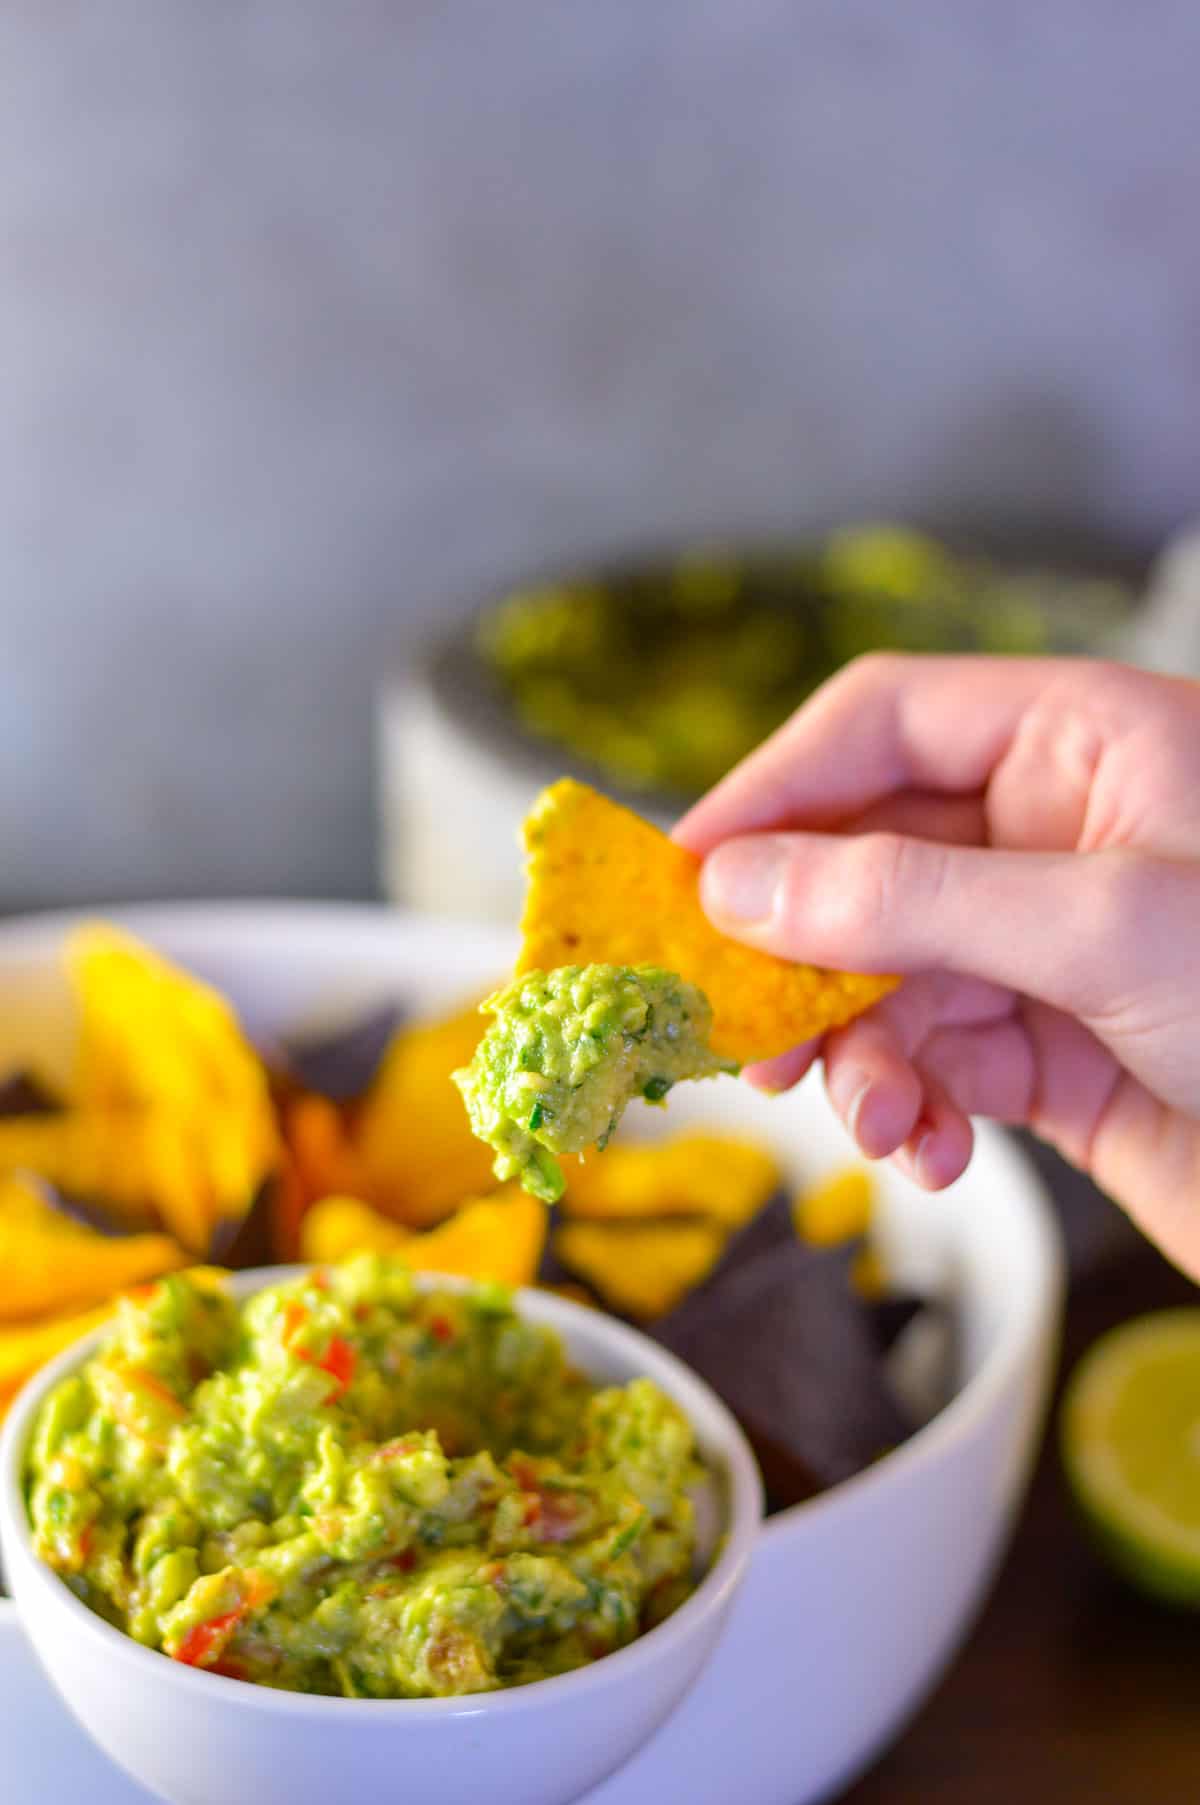 Chip being dipped in guacamole with bowl of chips and guac in background